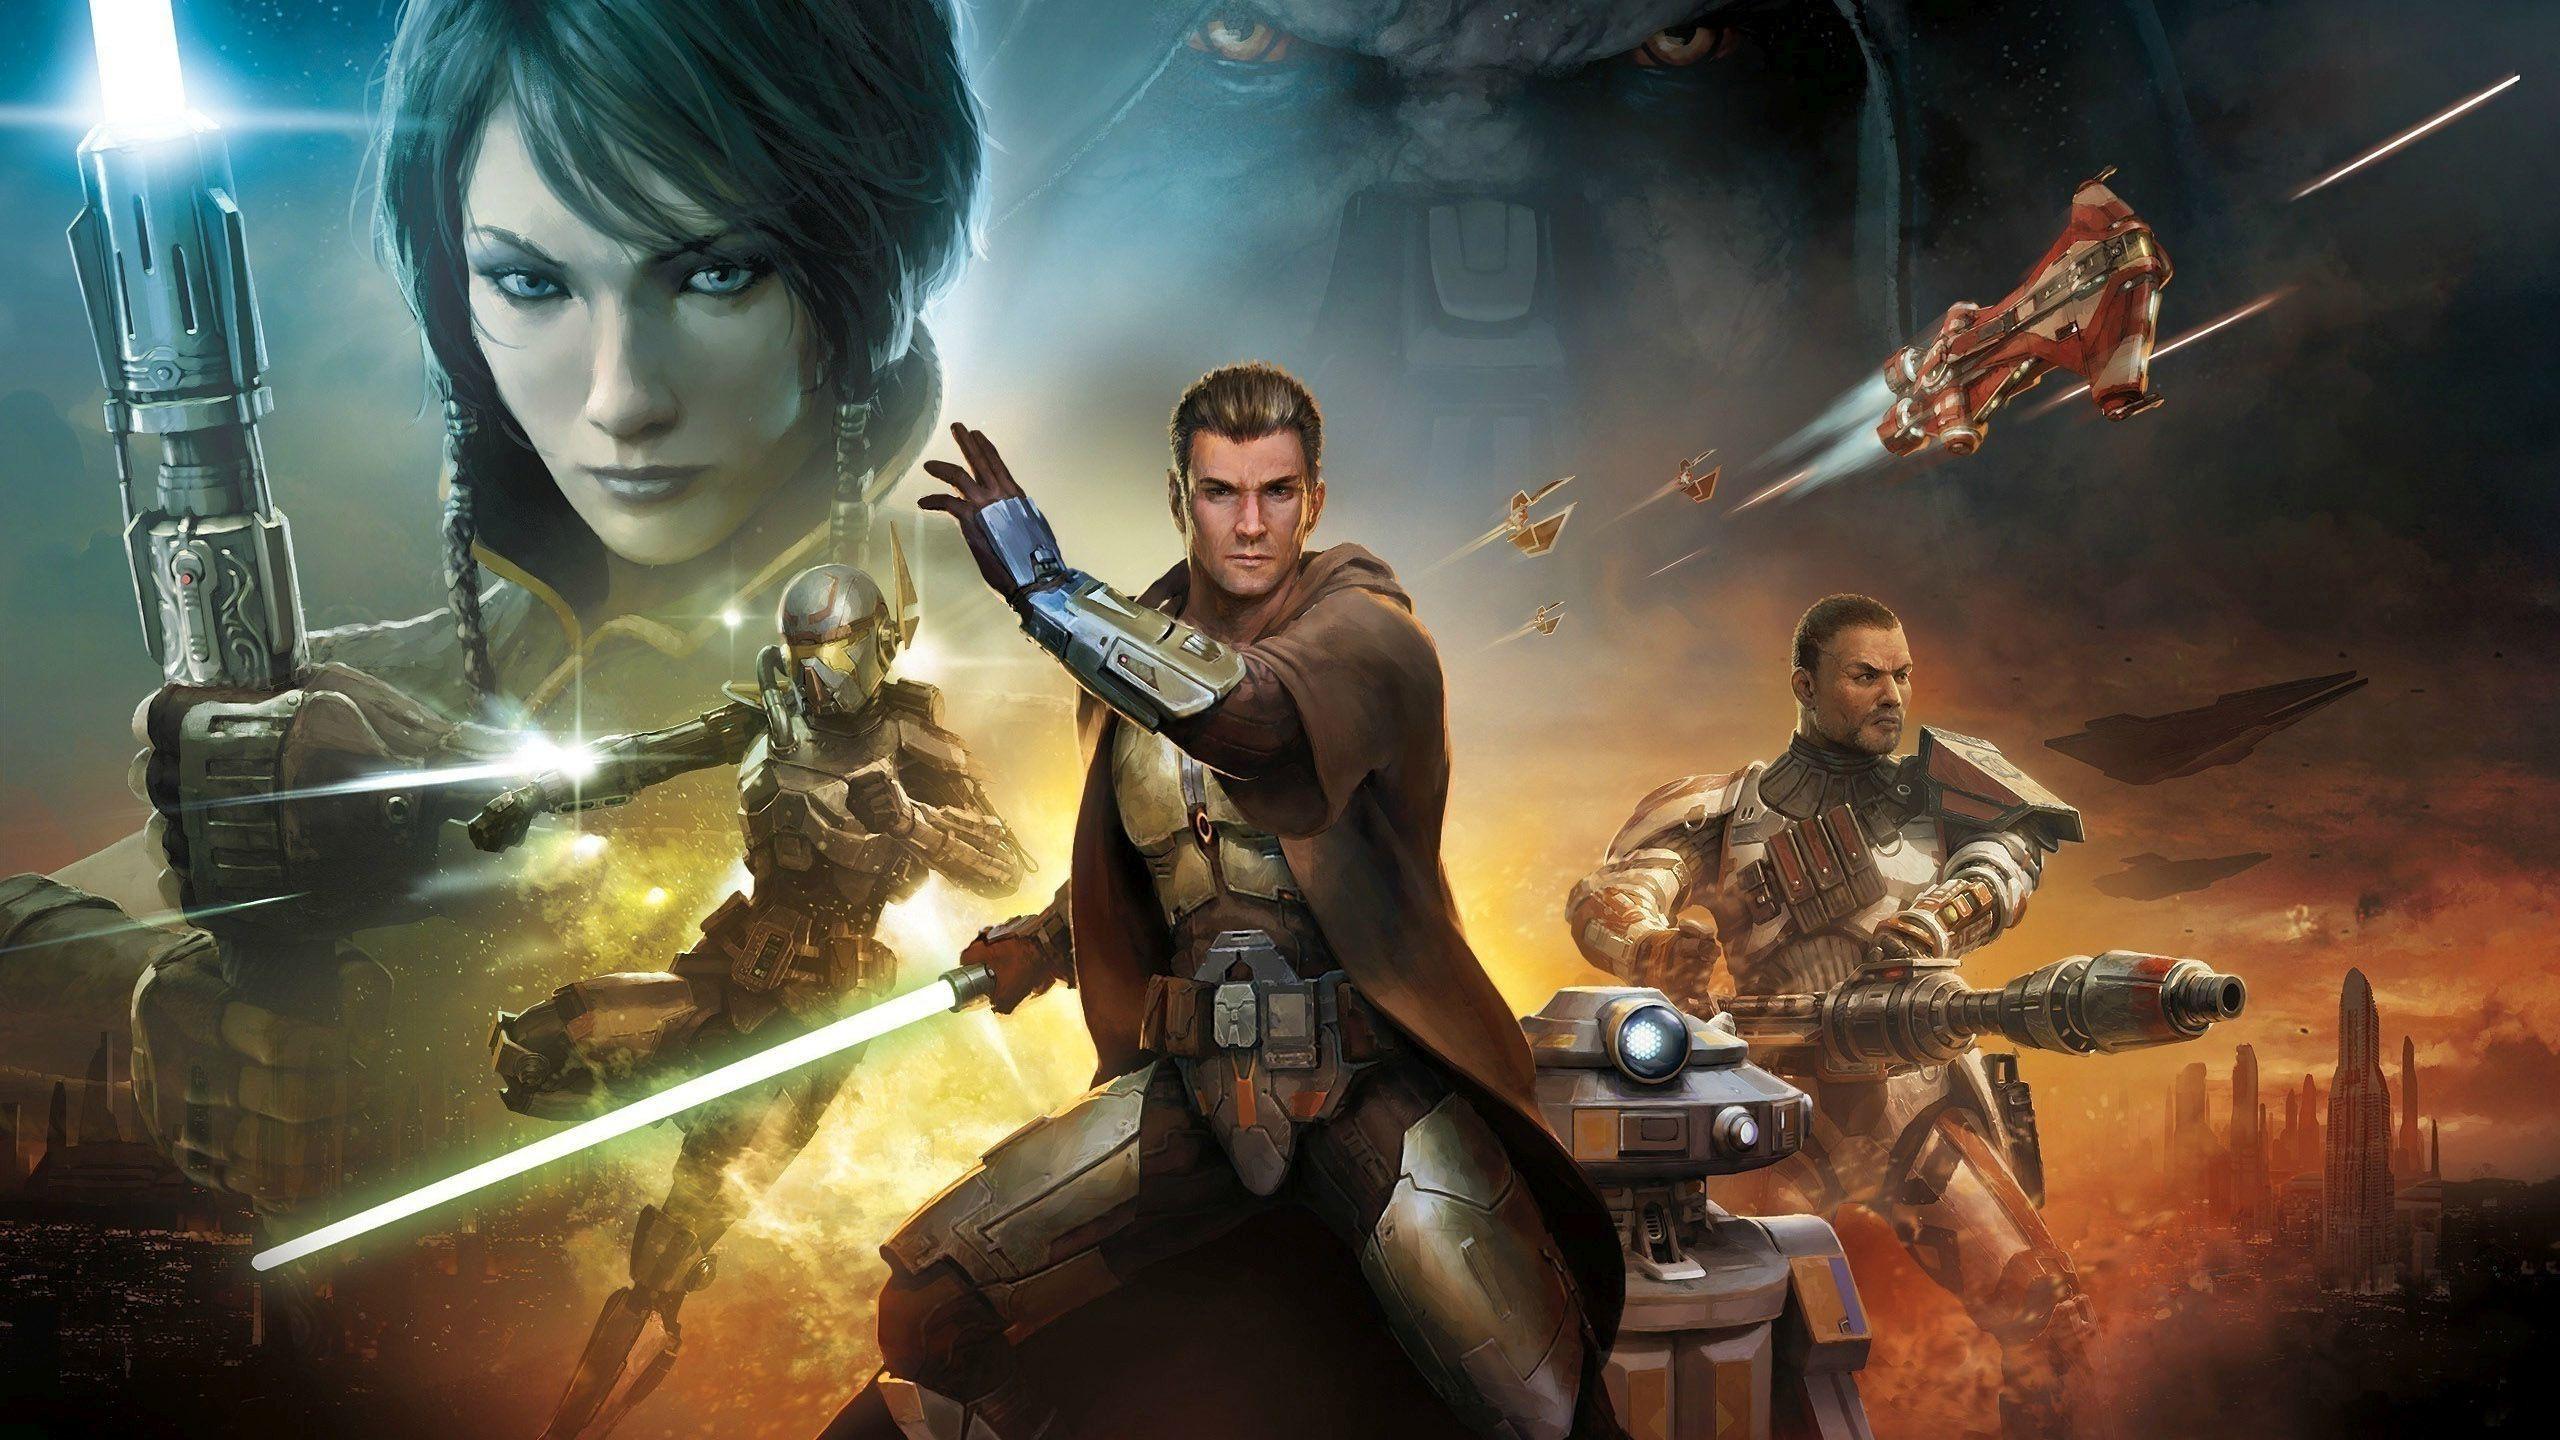 Games Star Wars Old Republic Swtor Full HD Wallpaper Games for HD